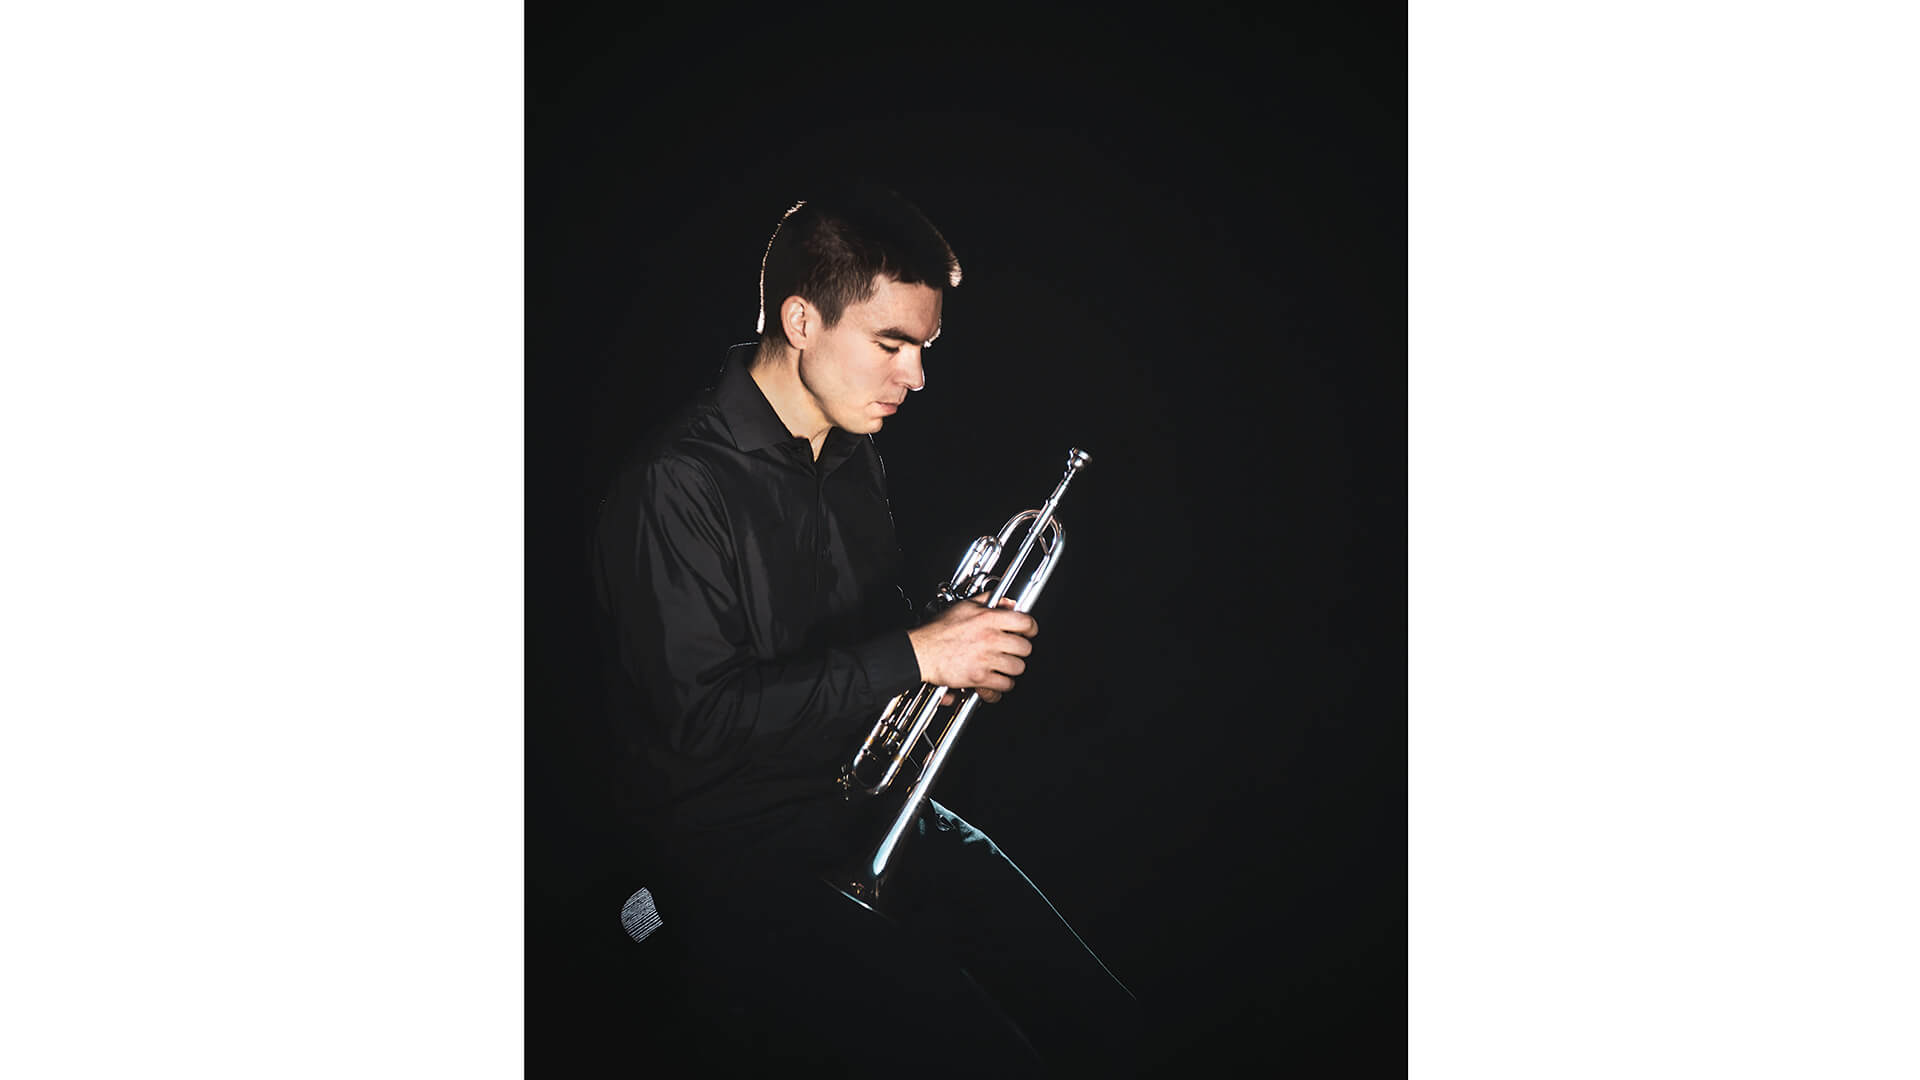 Student holds trumpet